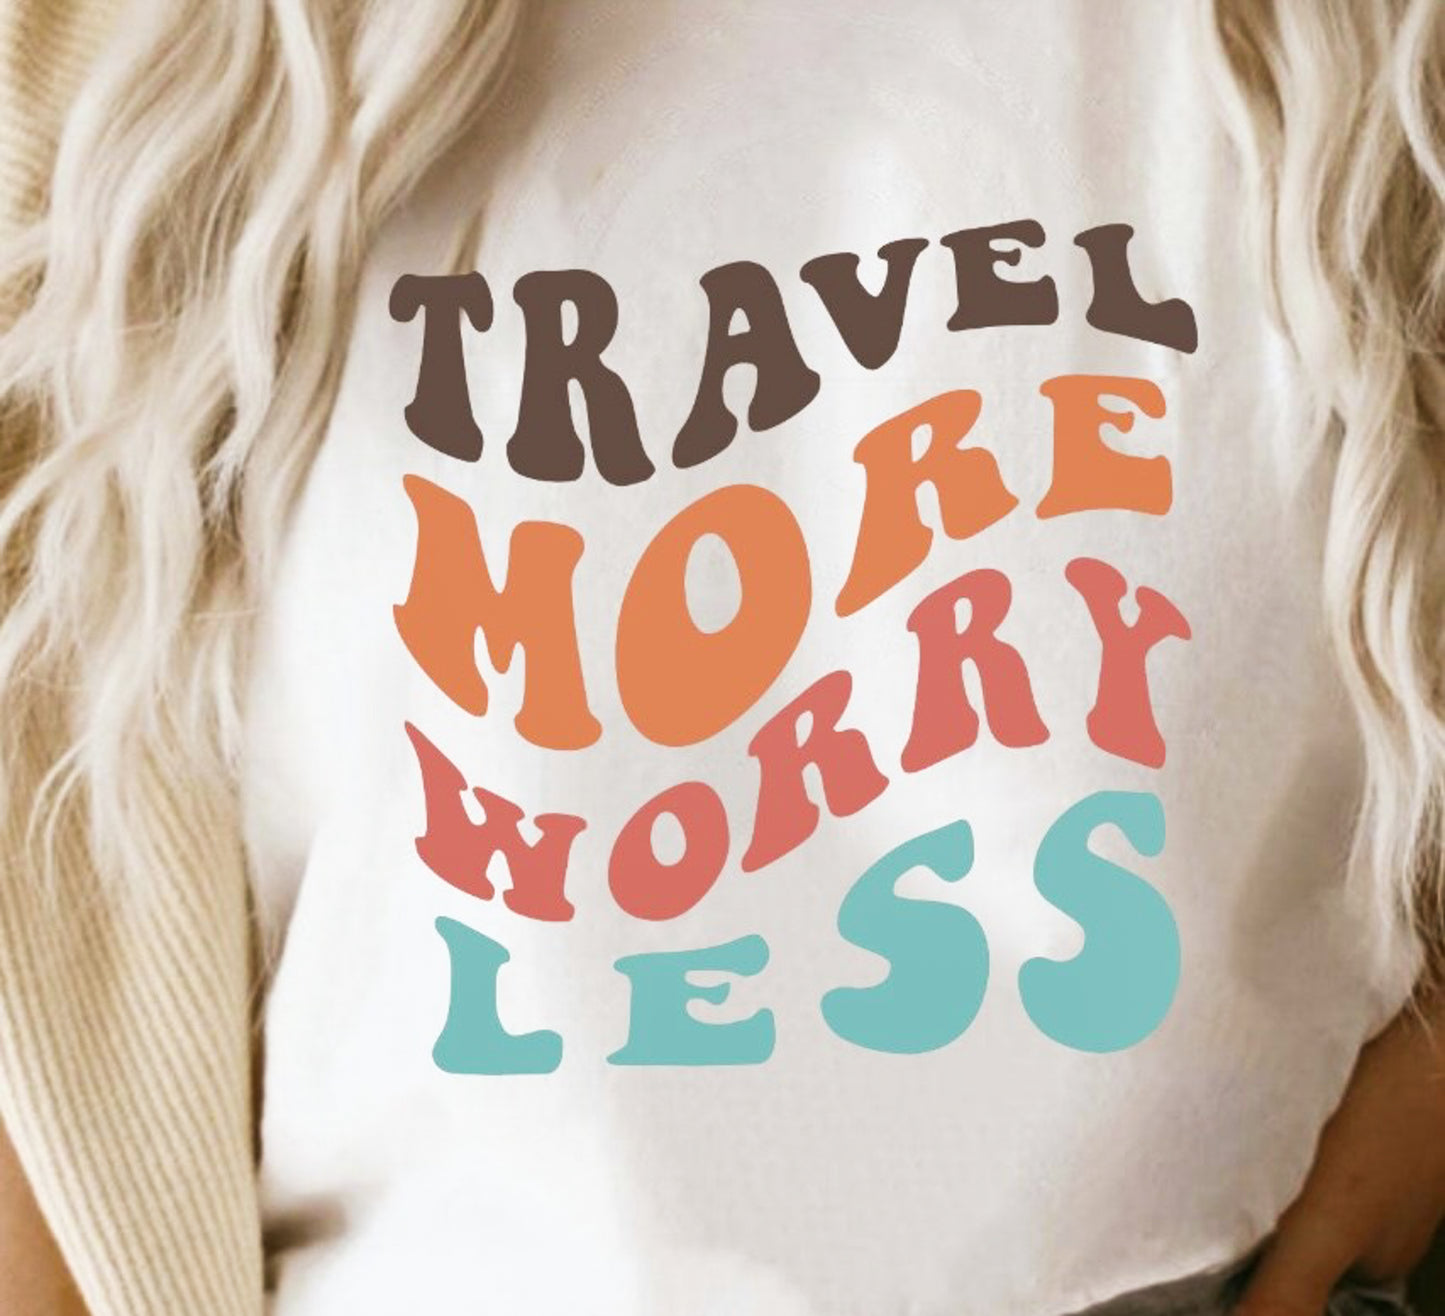 Travel More Worry Less Tee